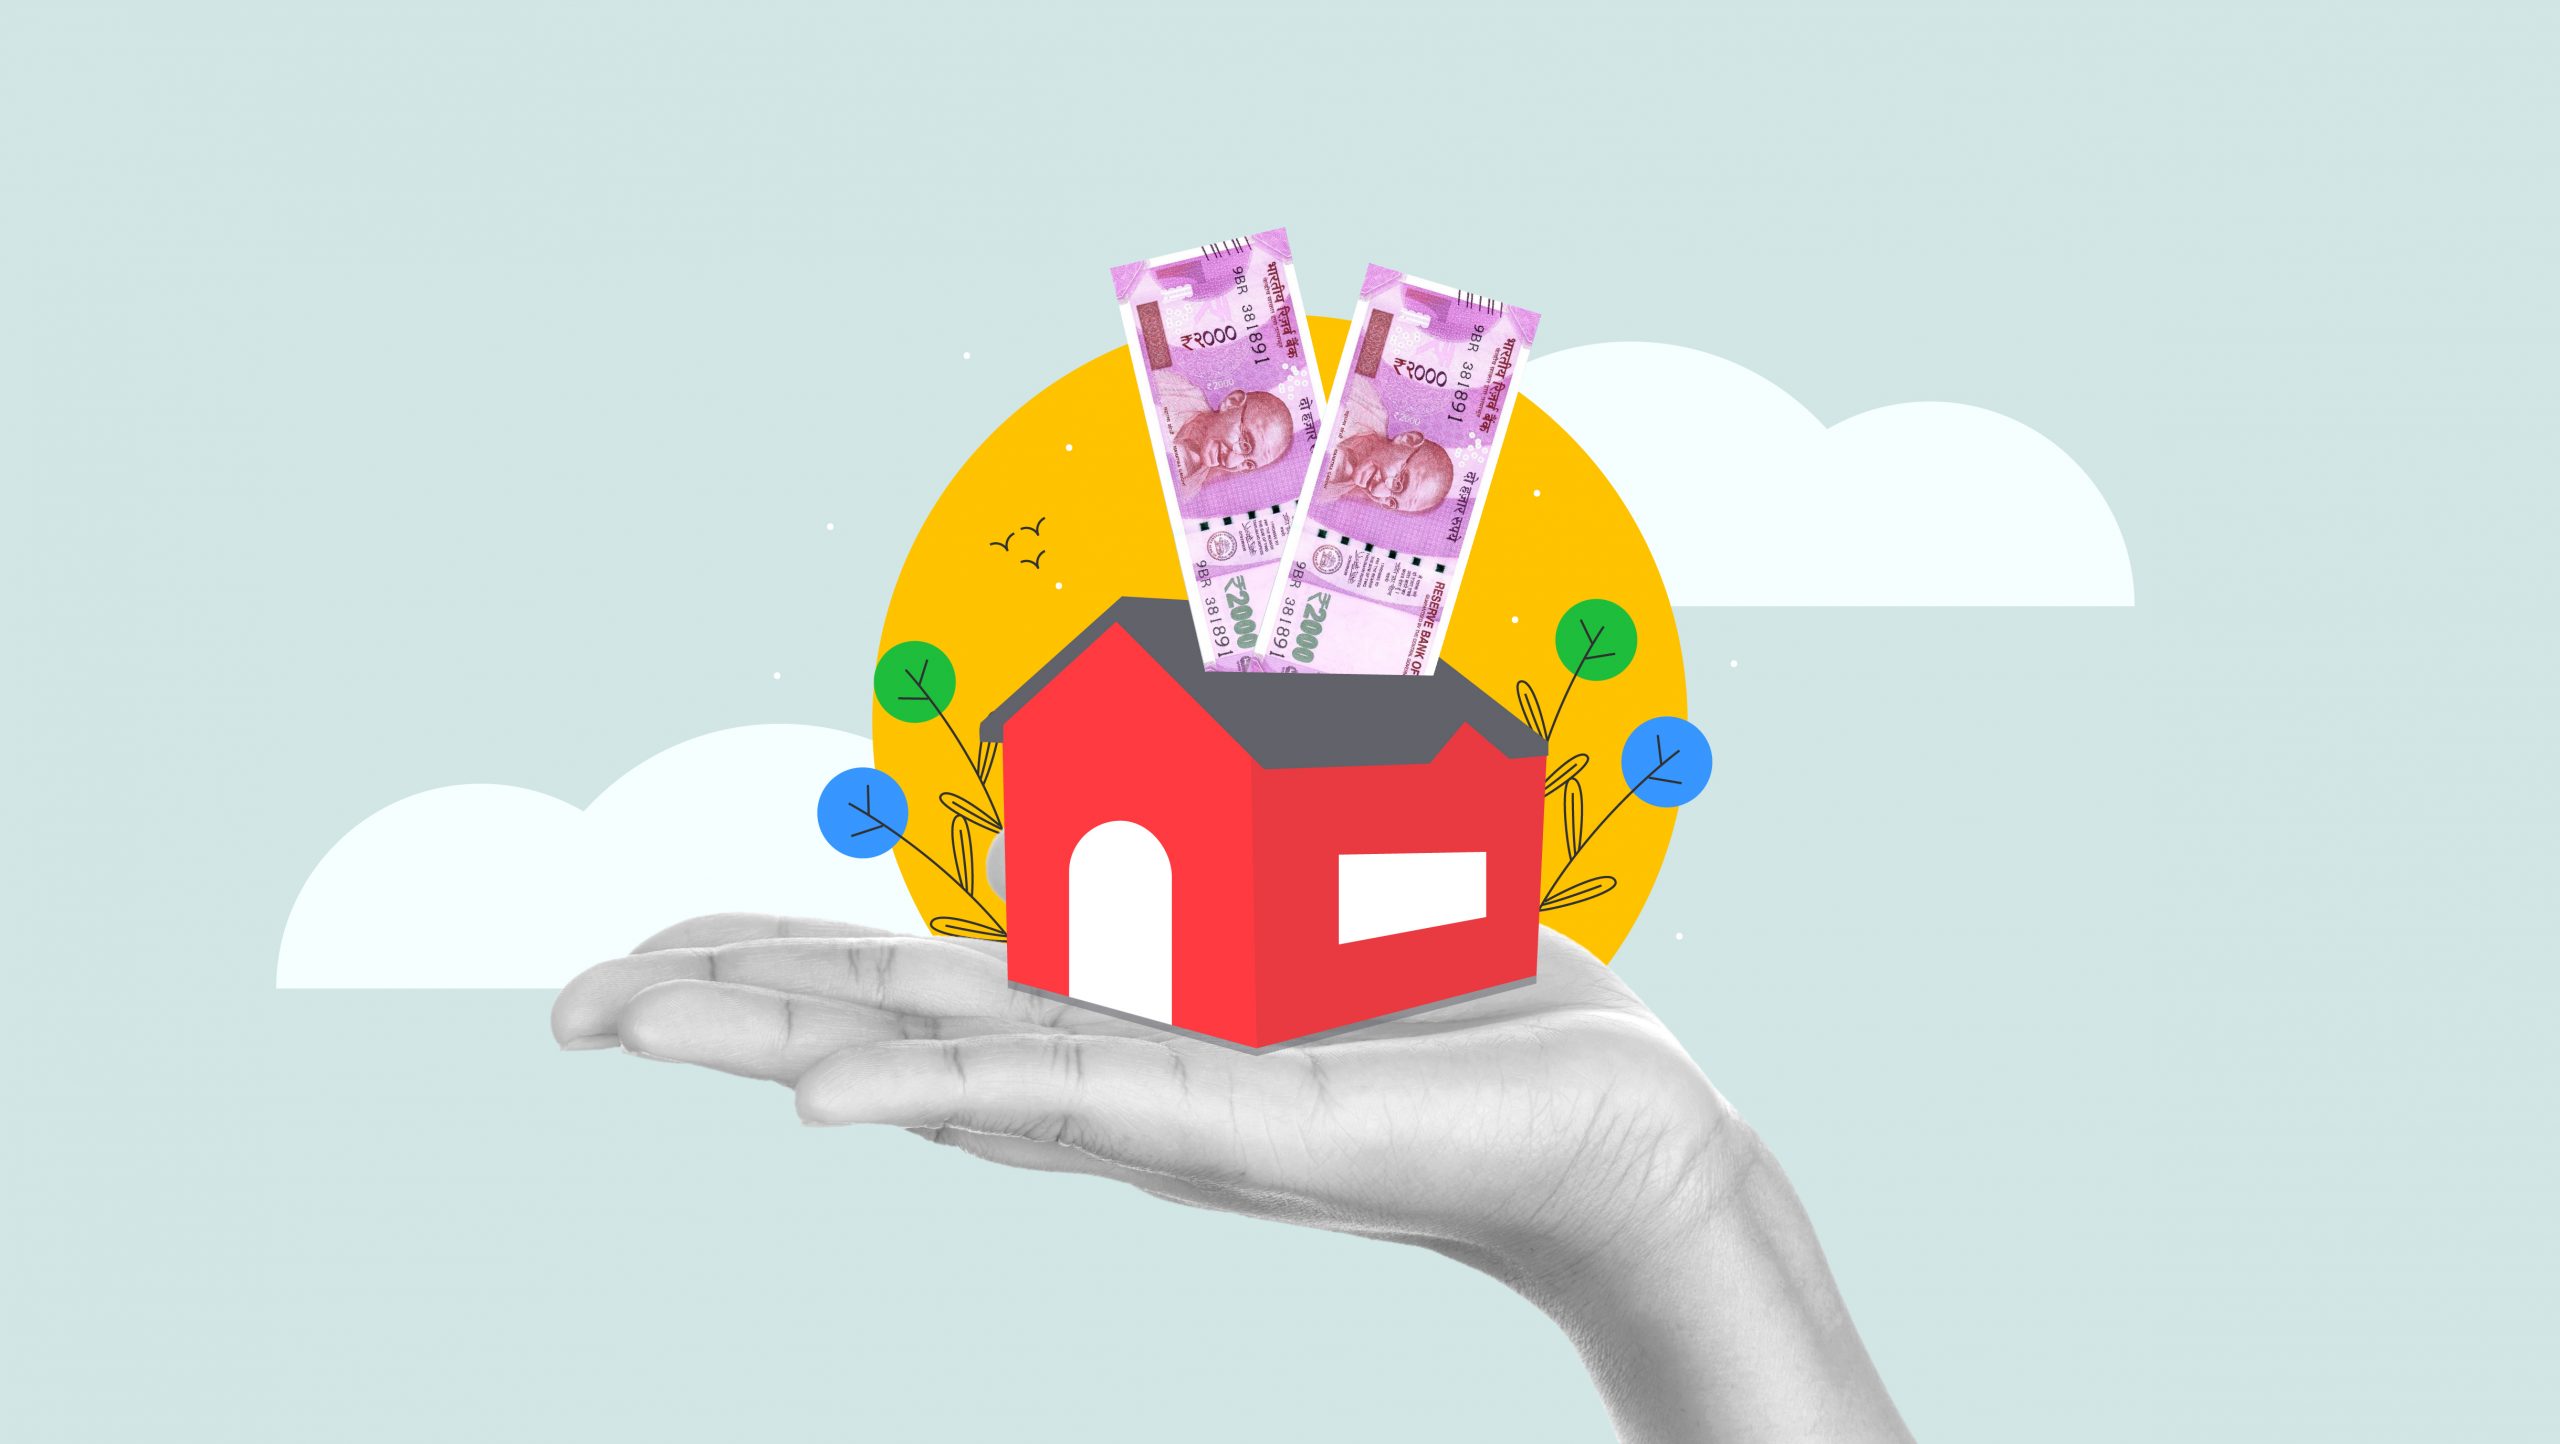 11 Best Home Loan Rates in India: Banks and Offers Reviewed